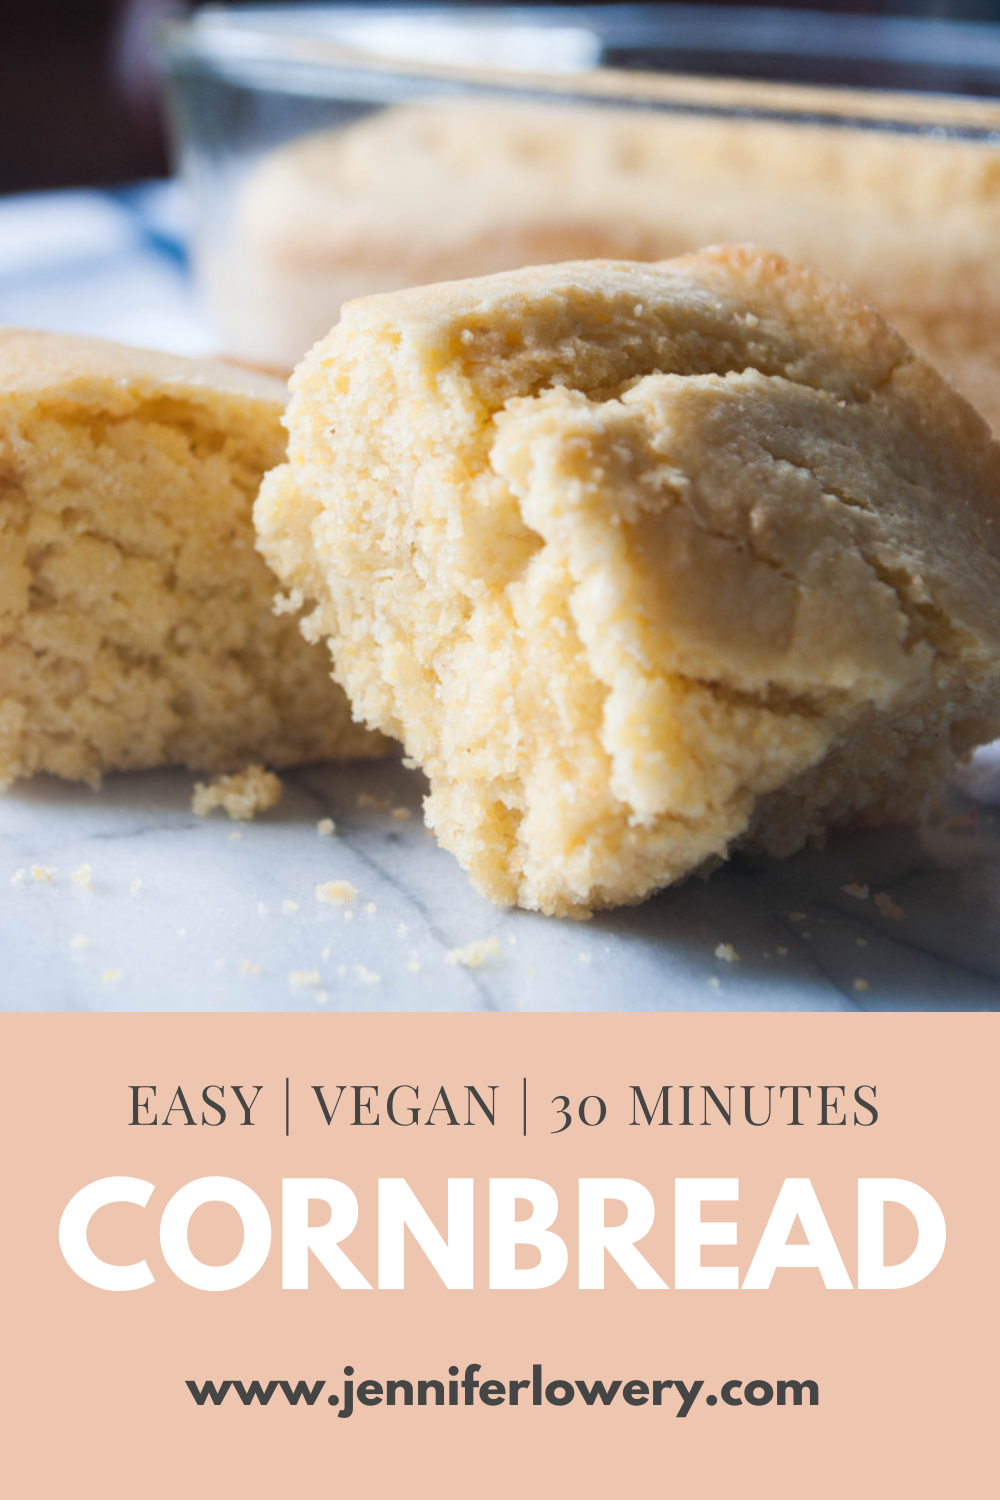 Pinterest Pin of two pieces of easy, vegan, 30-minute cornbread